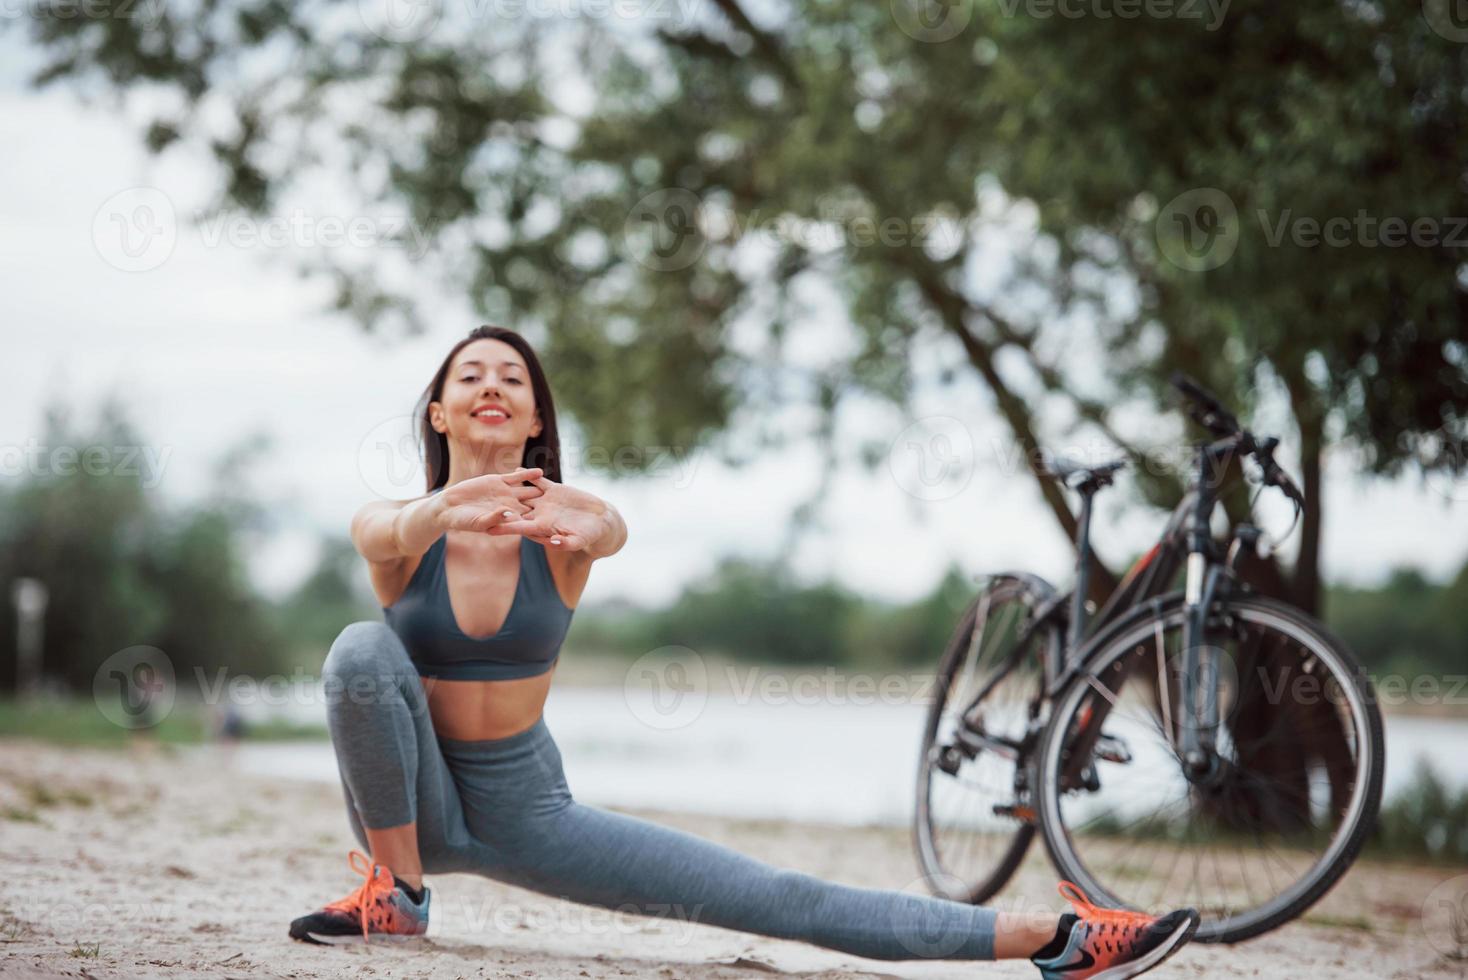 This exercise will make you more flexible. Female cyclist with good body shape doing yoga and stretching near her bike on beach at daytime photo